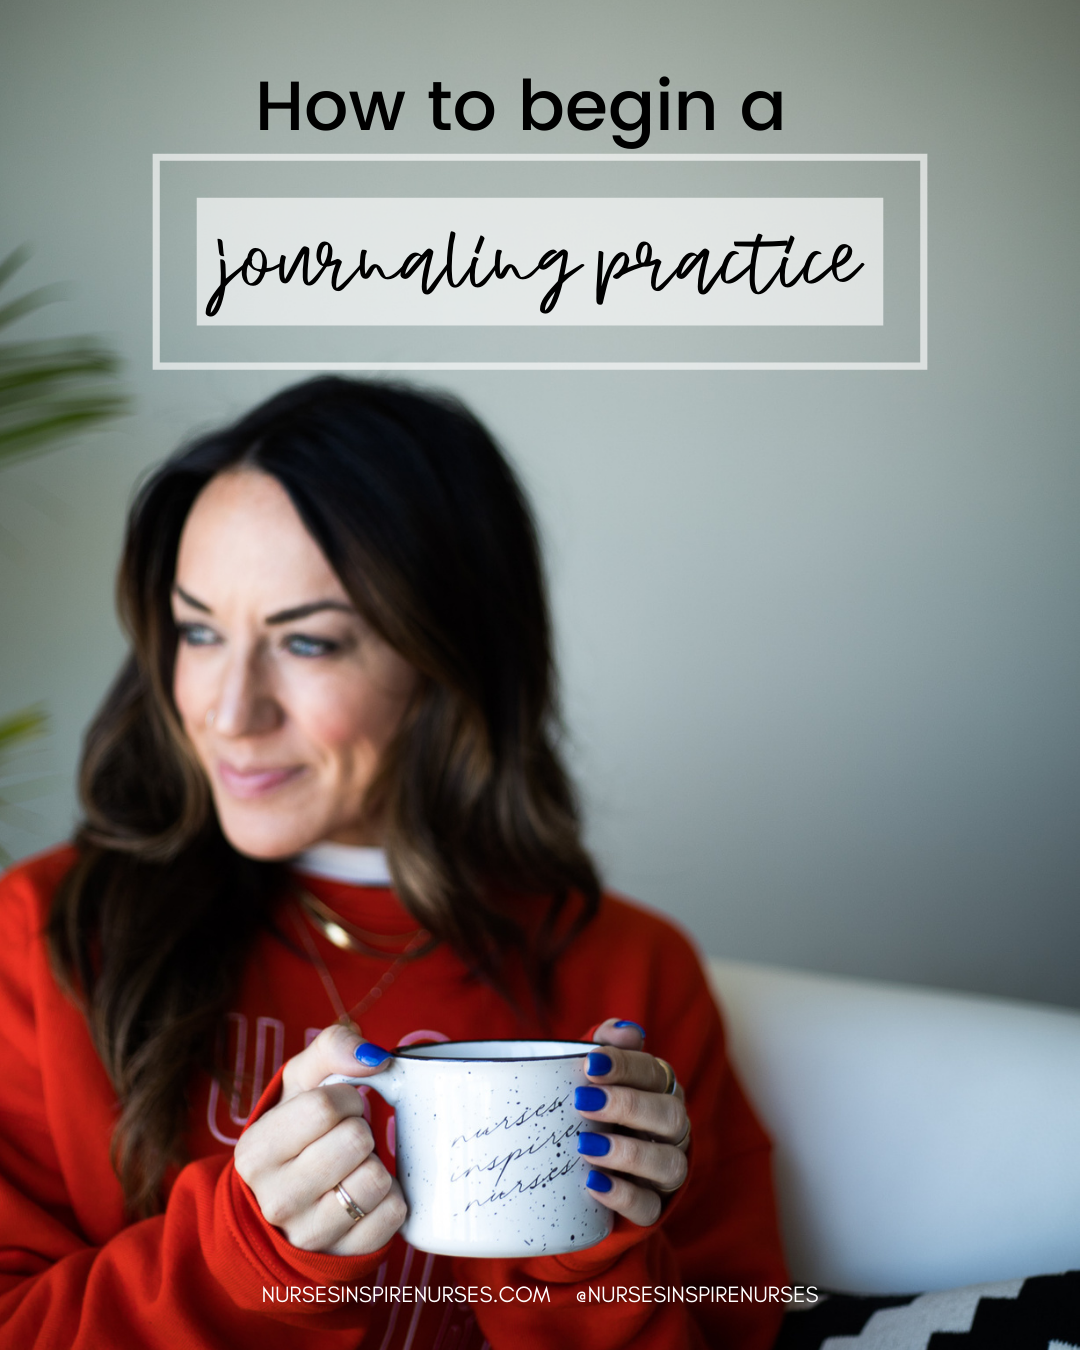 How To Begin A Journaling Practice